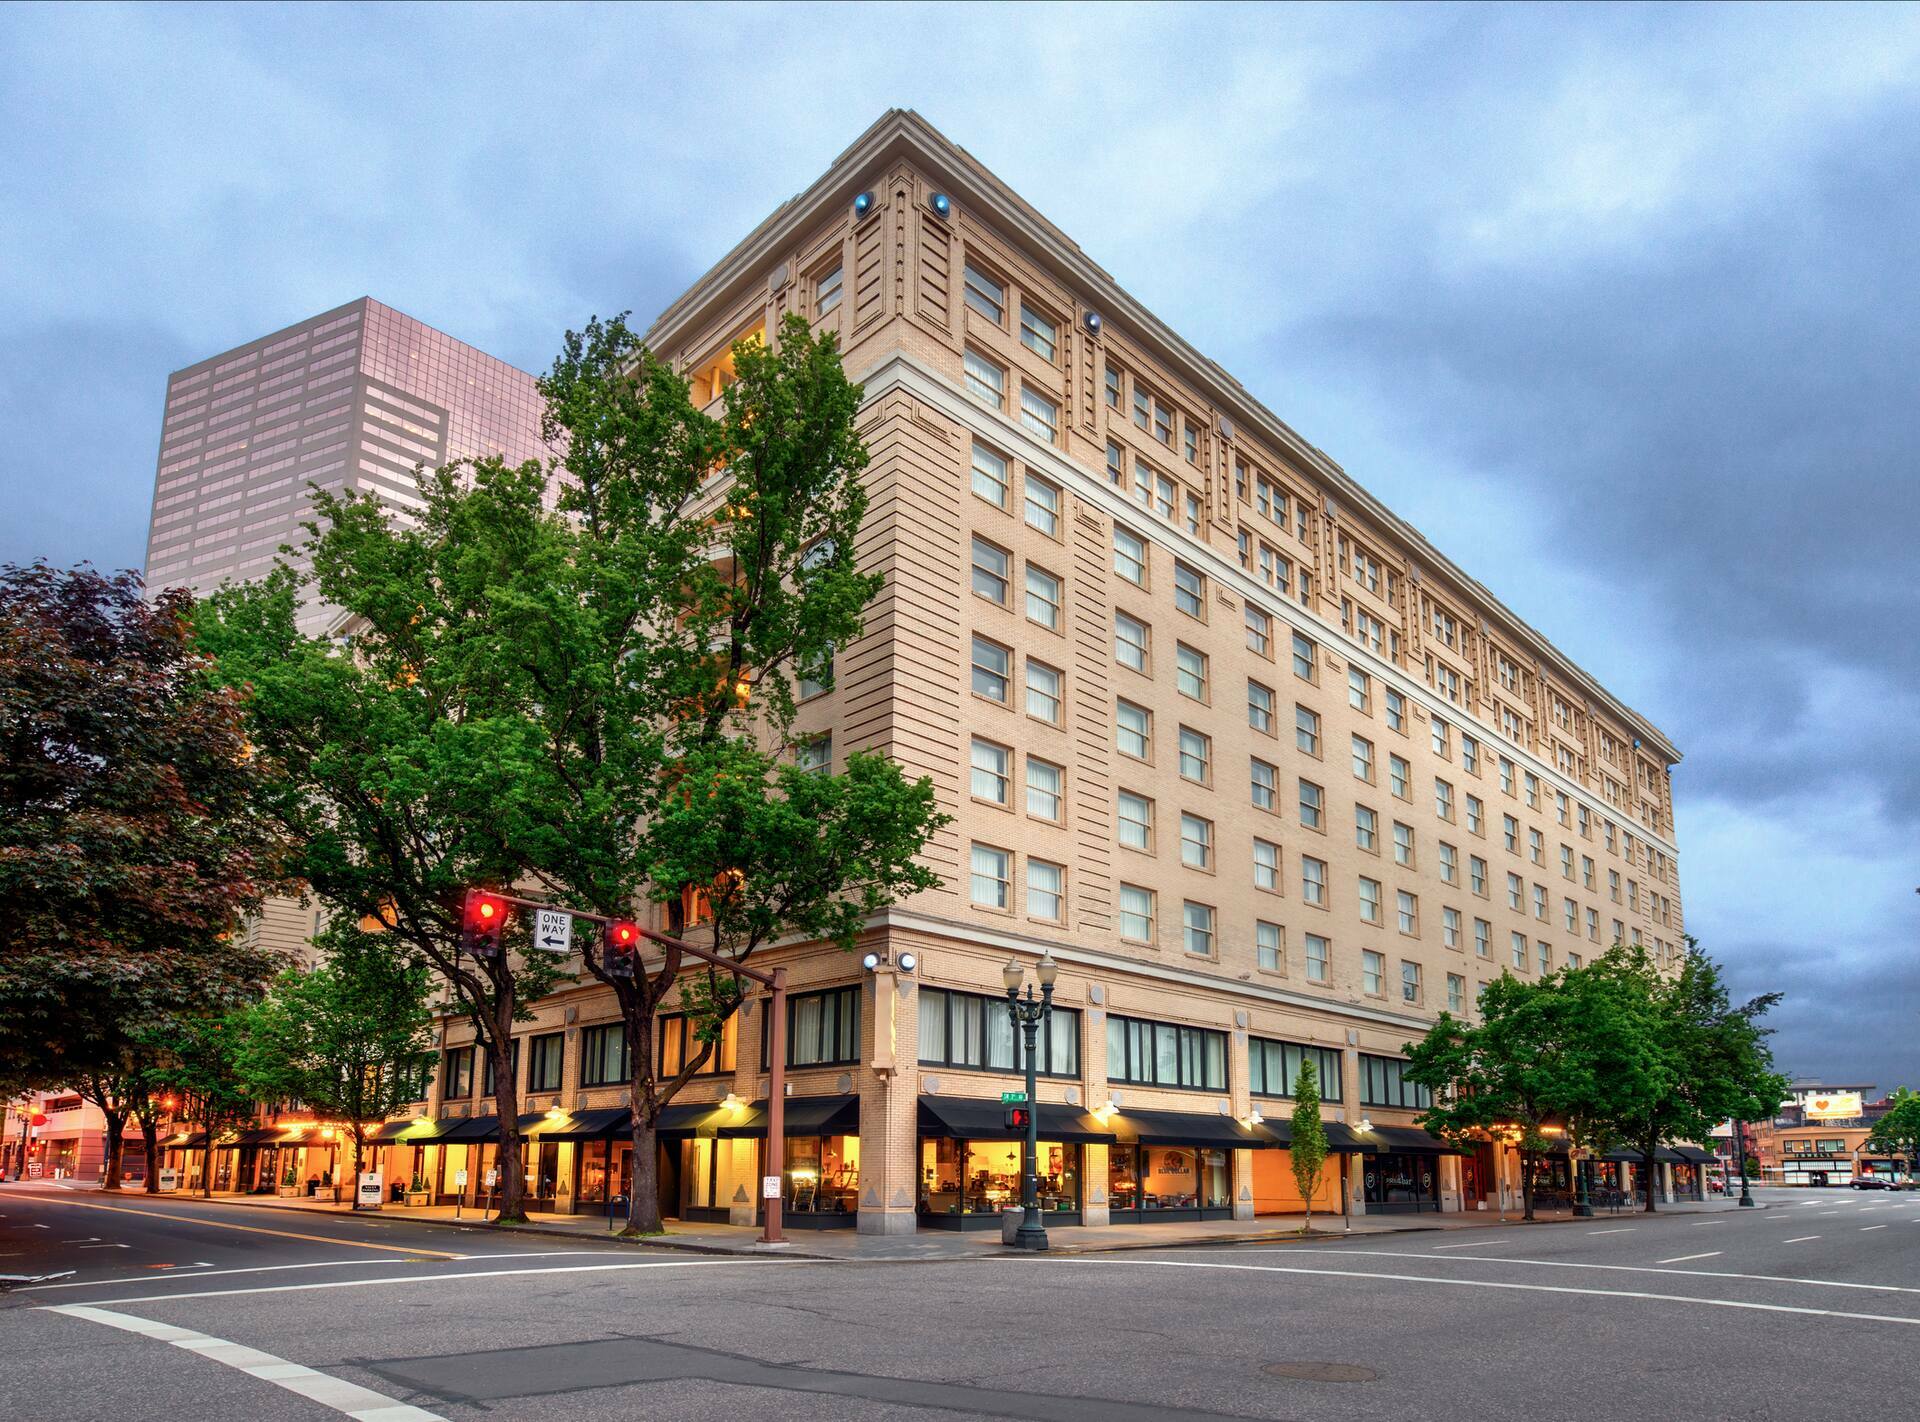 Photo of Embassy Suites by Hilton Portland Downtown, Portland, OR